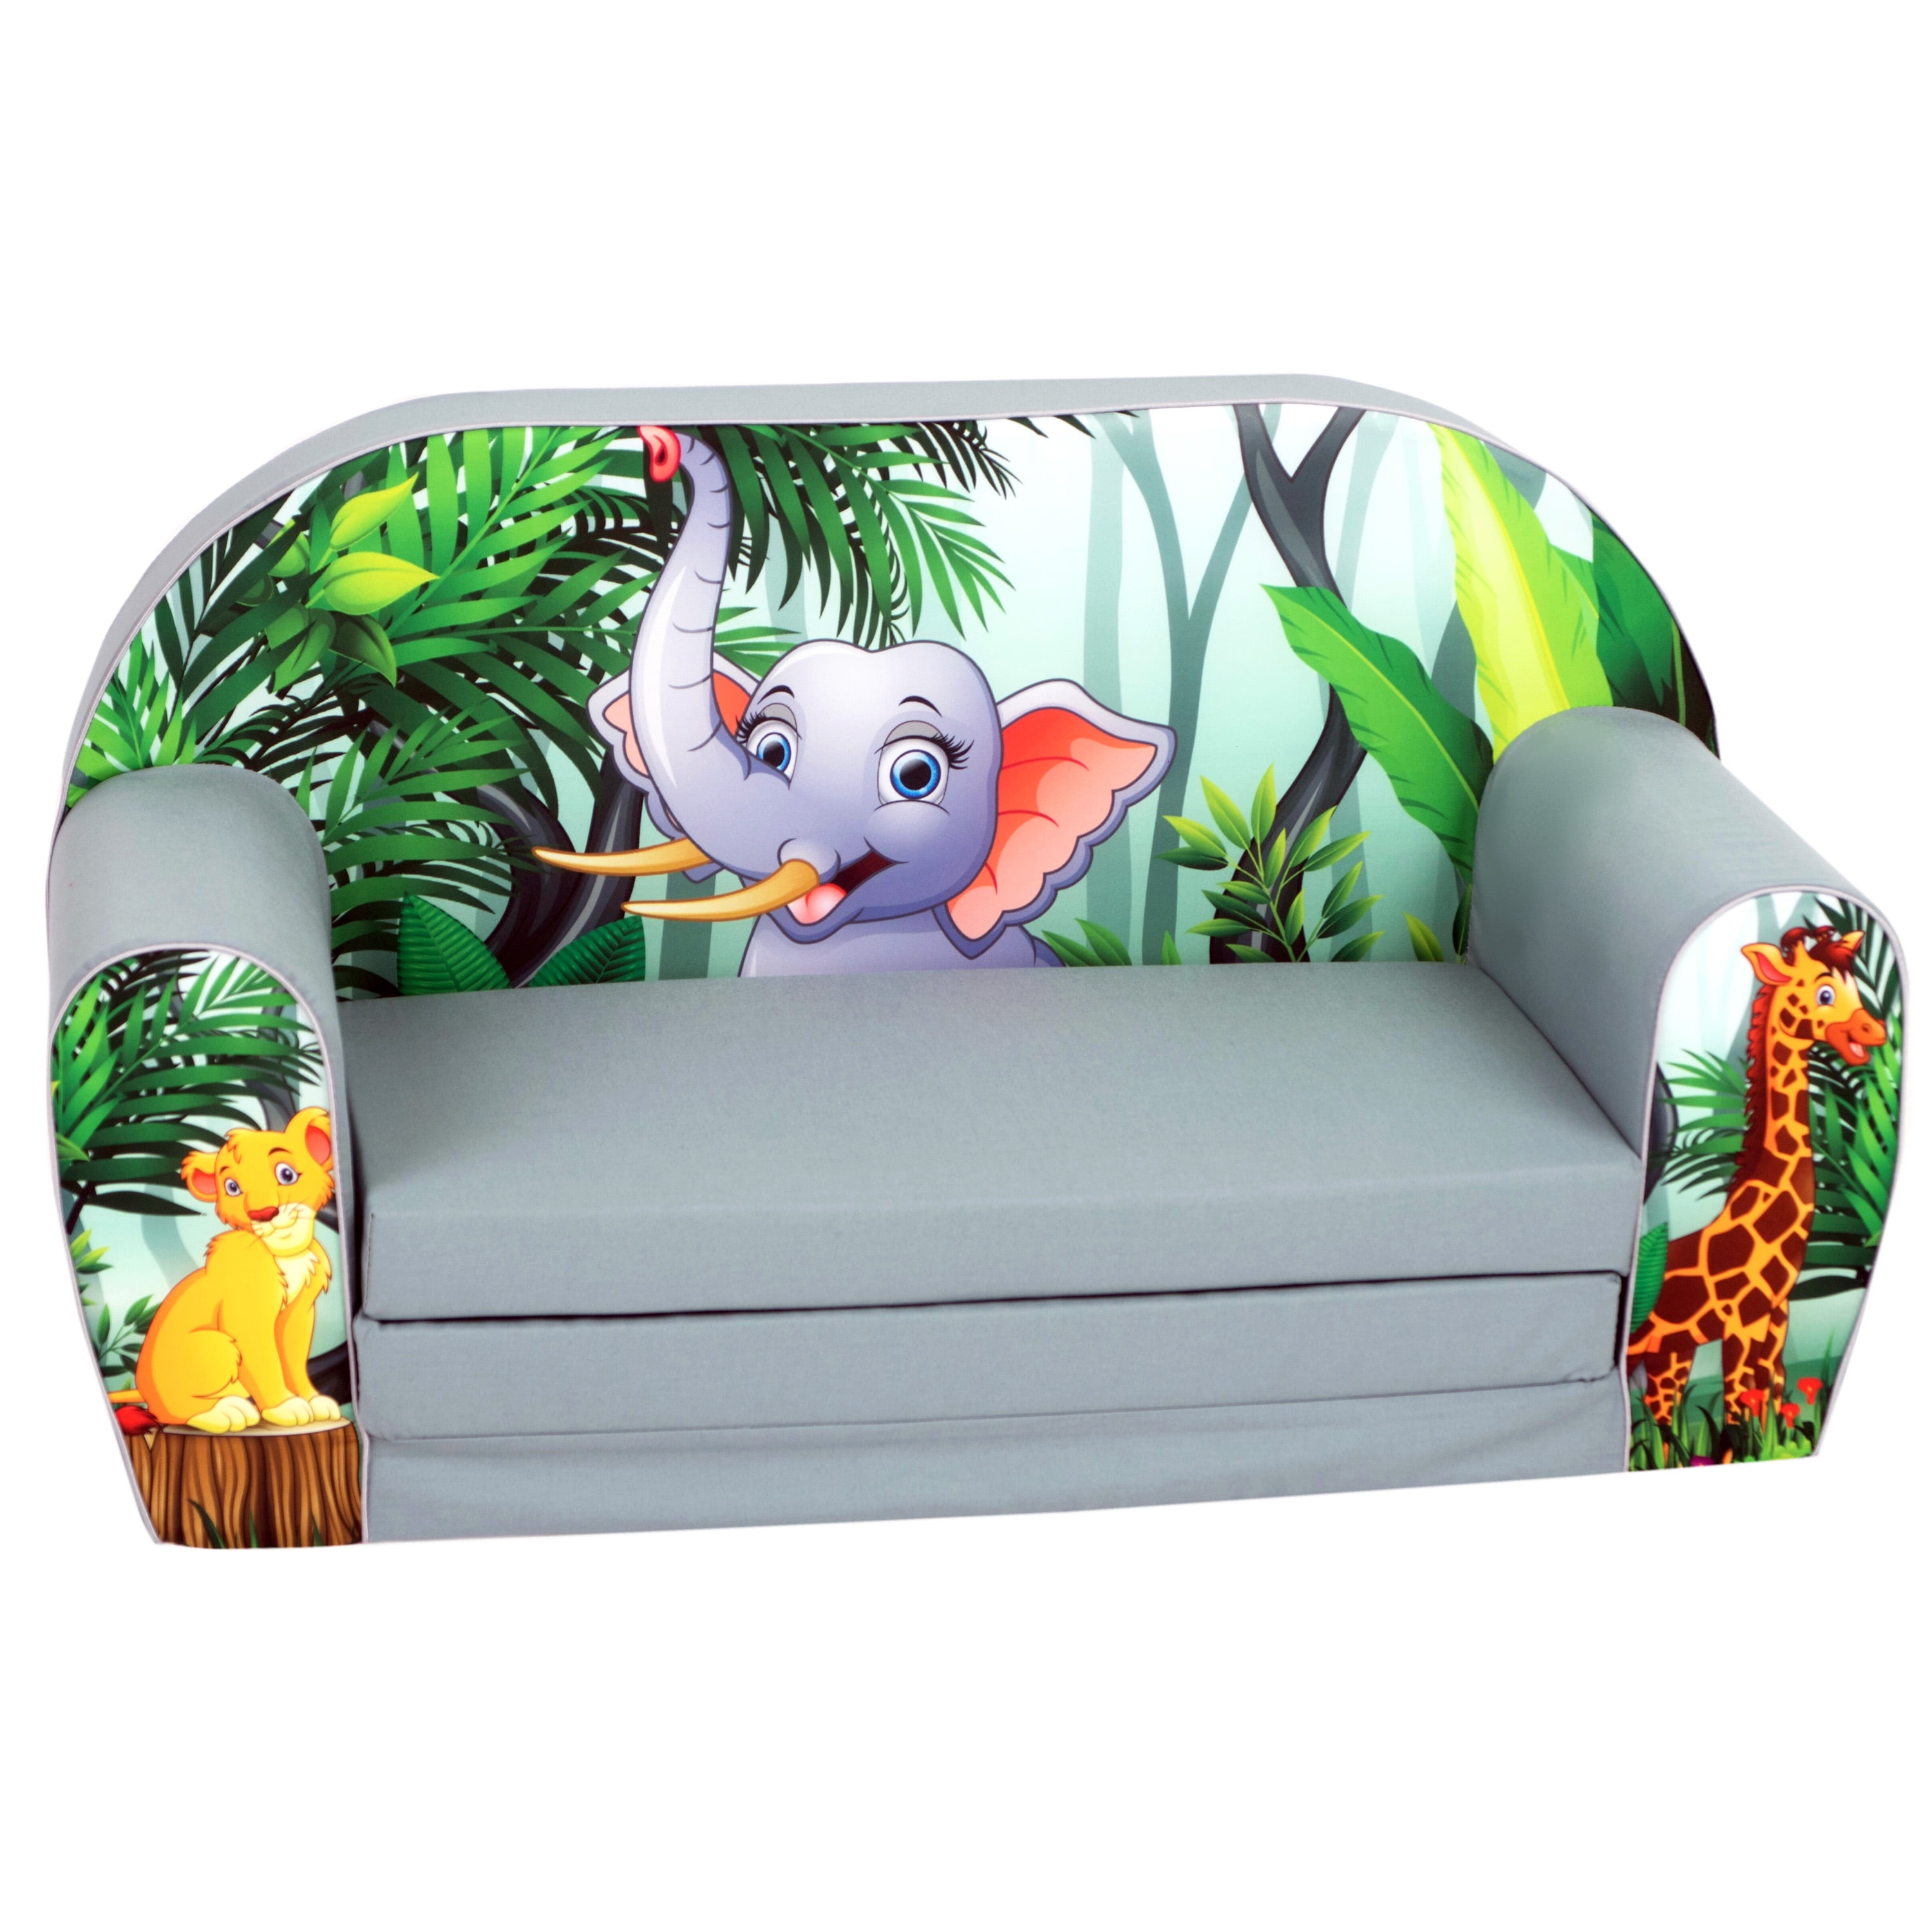 Elephant Childrens Chair Toddler Children Washable Removable Cover Play Room 